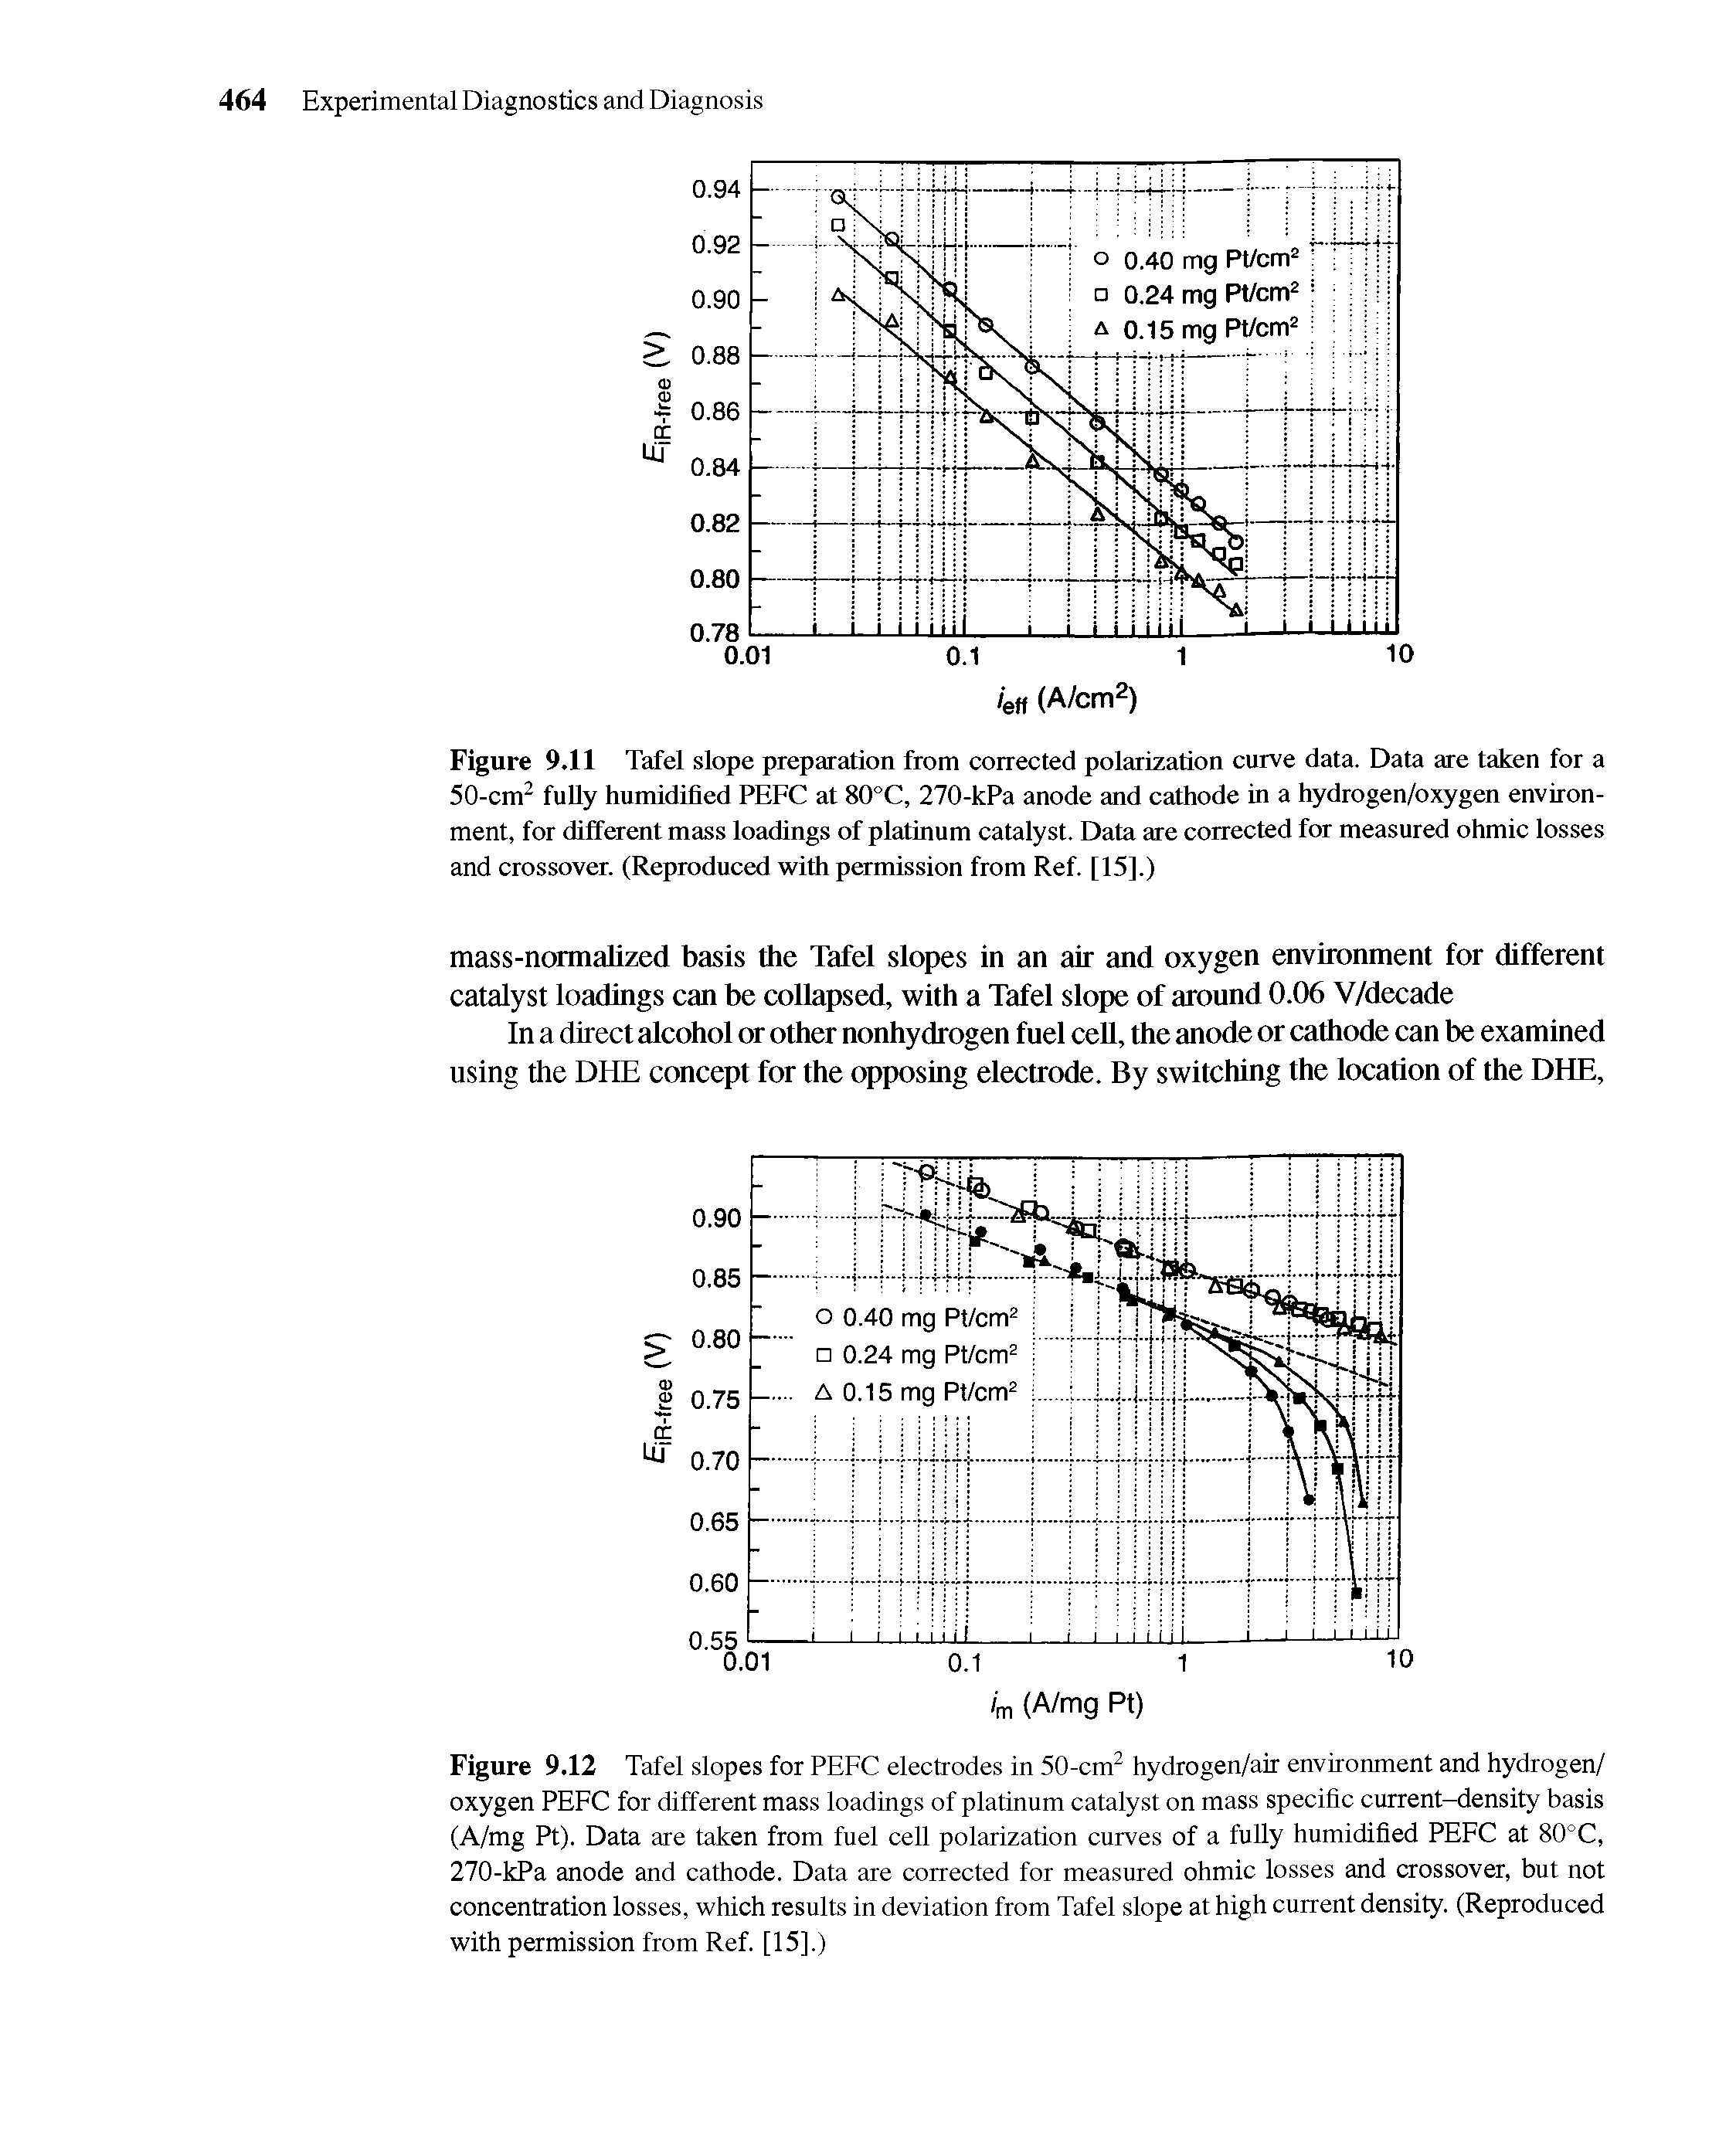 Figure 9.12 Tafel slopes for PEFC electrodes in 50-cm hydrogen/air environment and hydrogen/ oxygen PEFC for different mass loadings of platinum catalyst on mass specific current-density basis (A/mg Pt). Data are taken from fuel cell polarization curves of a fully humidified PEFC at 80°C, 270-kPa anode and cathode. Data are corrected for measured ohmic losses and crossover, but not concentration losses, which results in deviation from Tafel slope at high current density. (Reproduced with permission from Ref. [15].)...